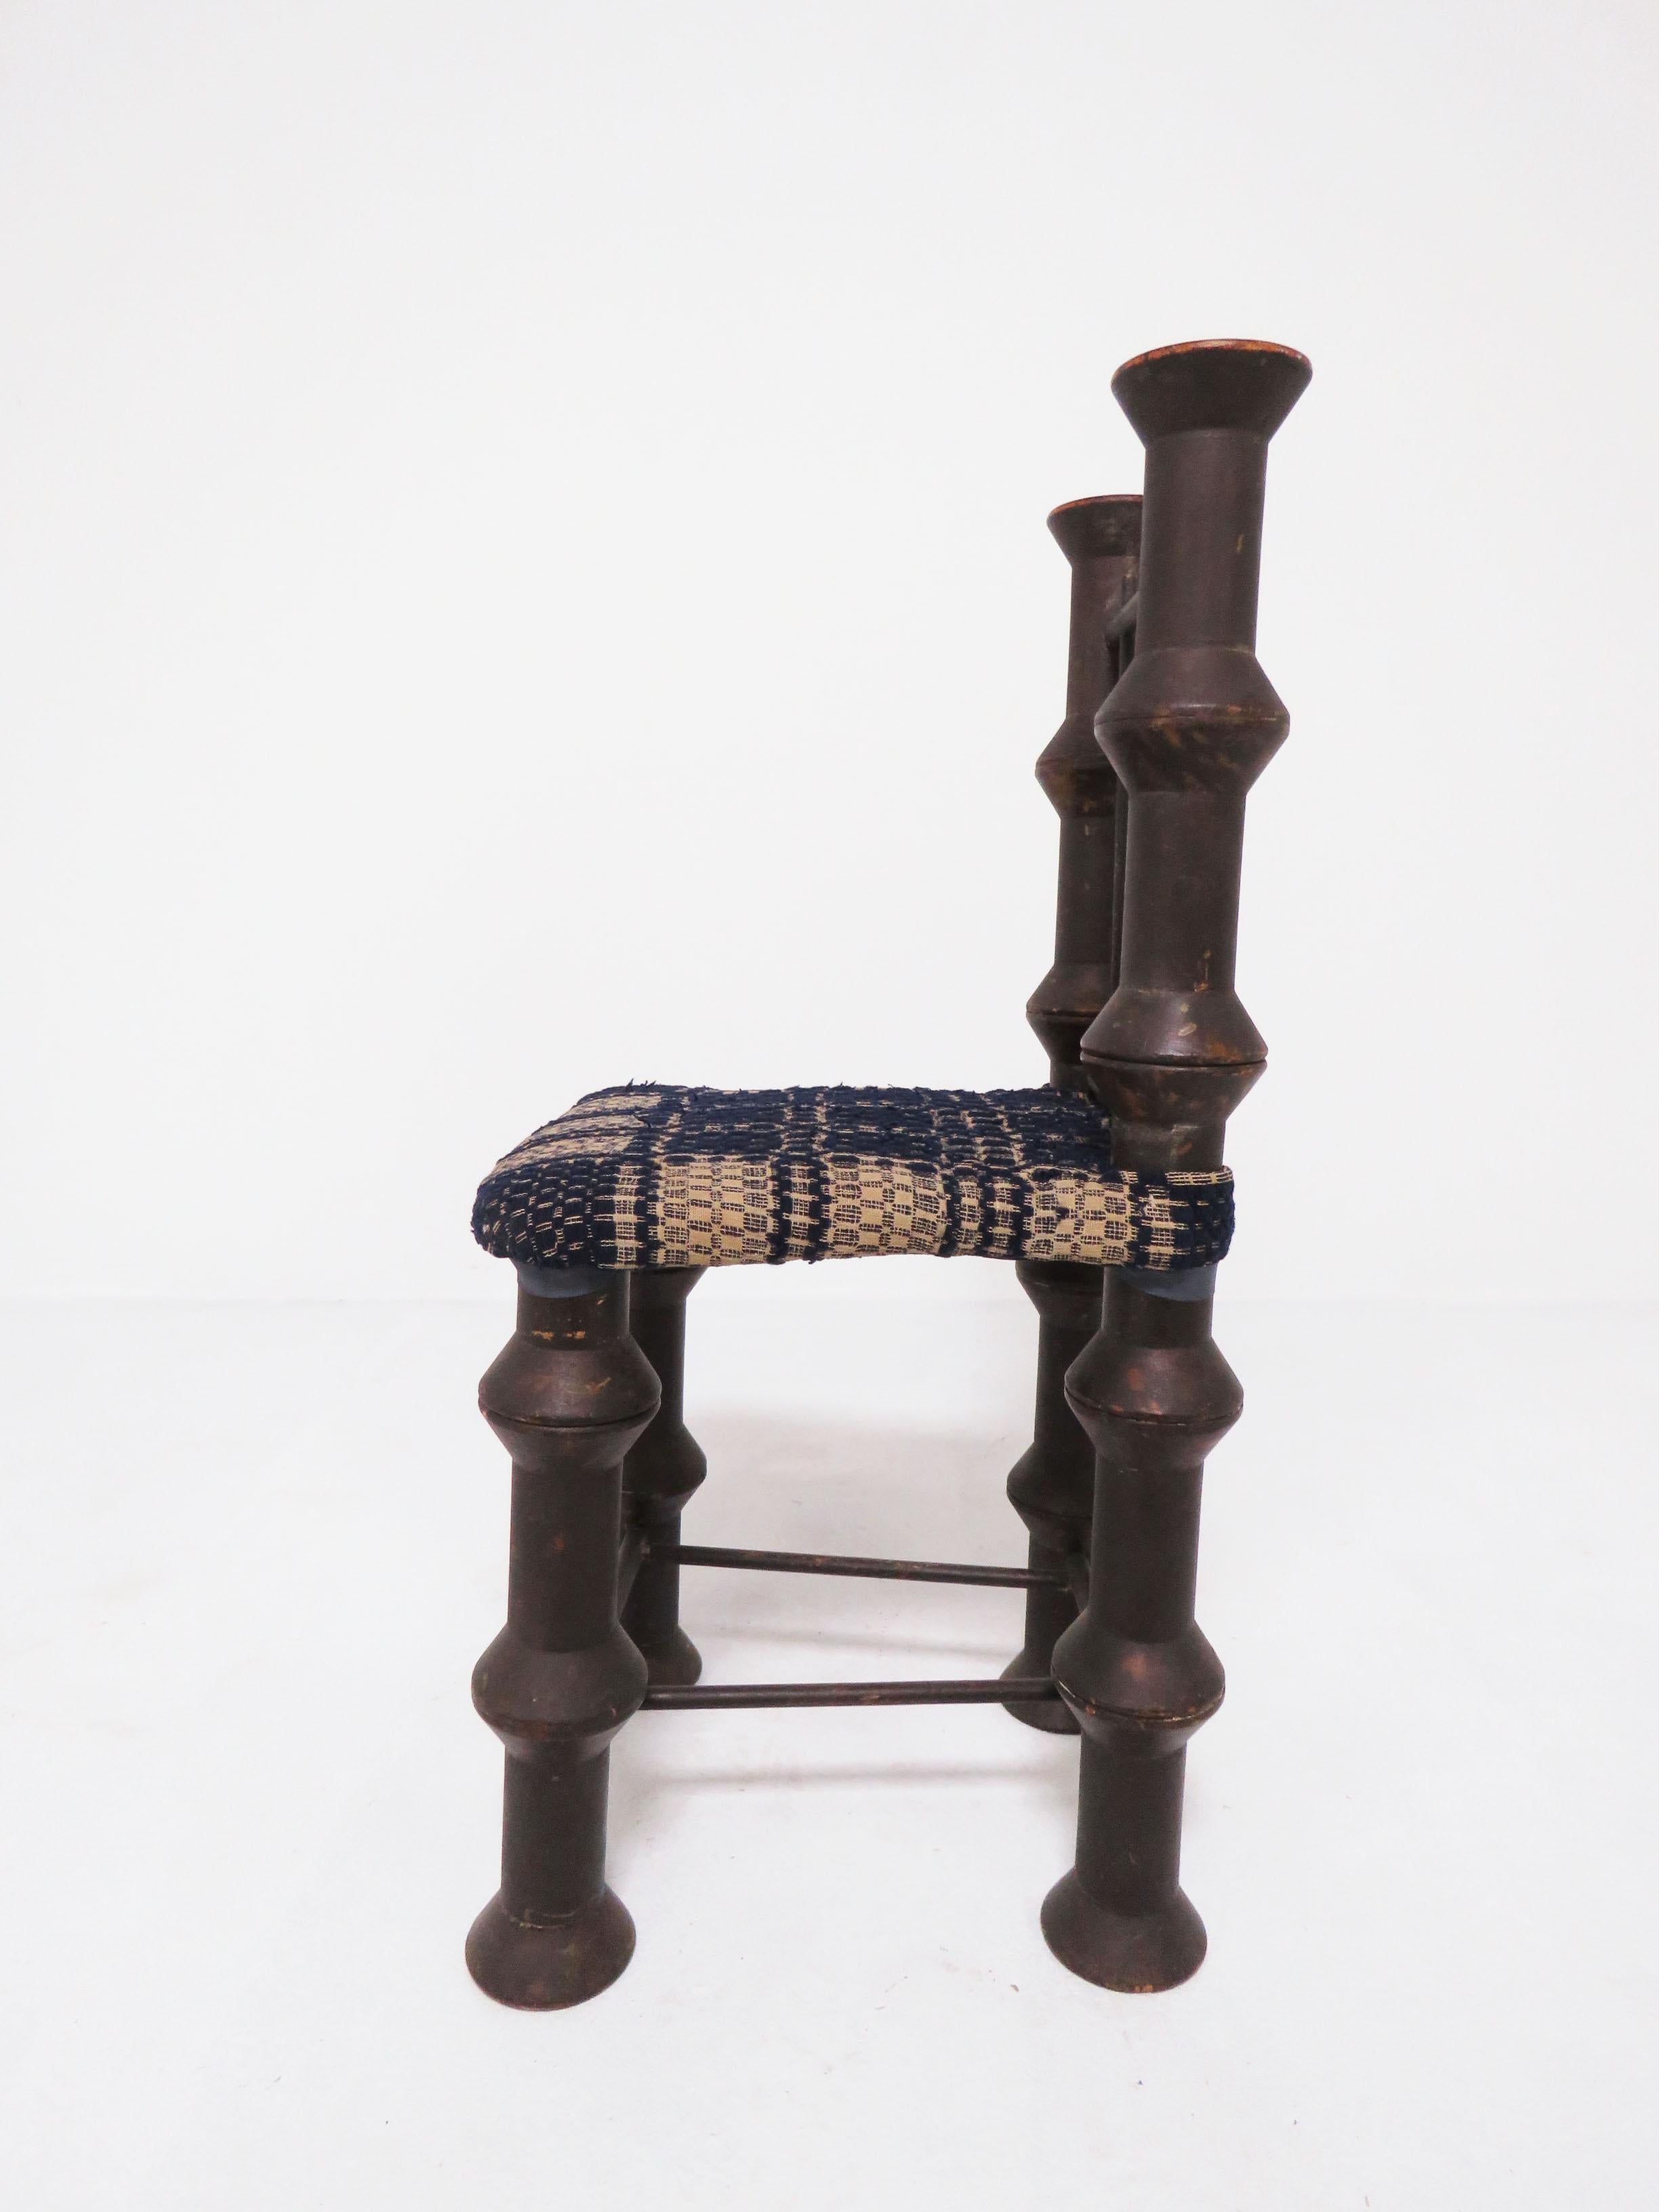 An early 20th Century folk art chair made of stacked 6” spools or “thread reels” evokes the once thriving textile industry of Massachusetts. Upholstered in a section of 19th century overshot coverlet.